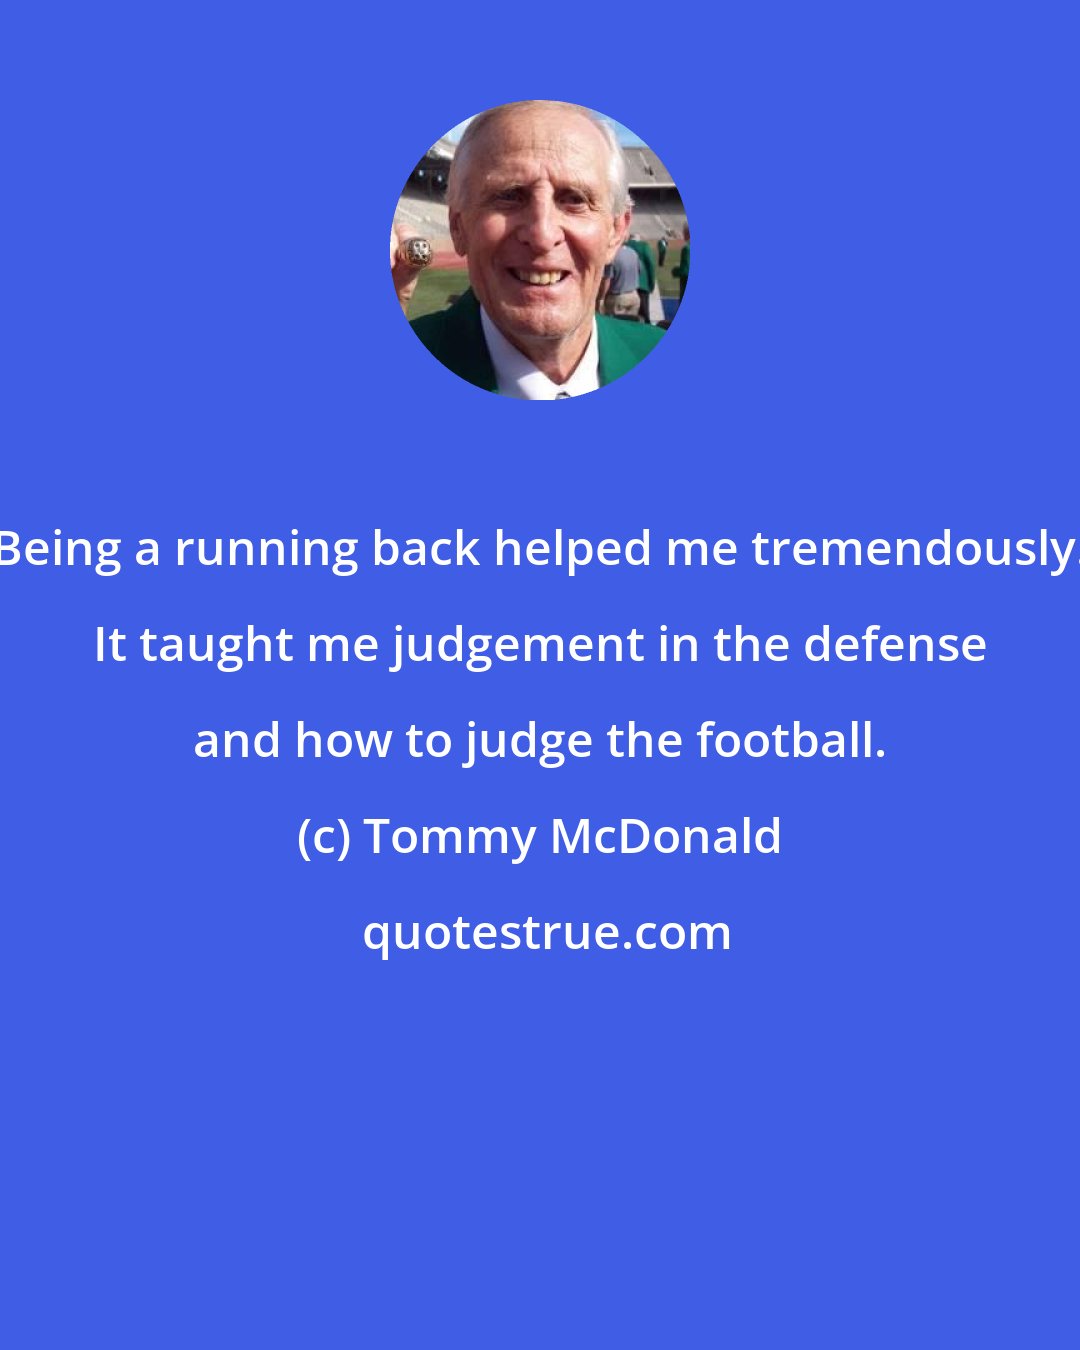 Tommy McDonald: Being a running back helped me tremendously. It taught me judgement in the defense and how to judge the football.